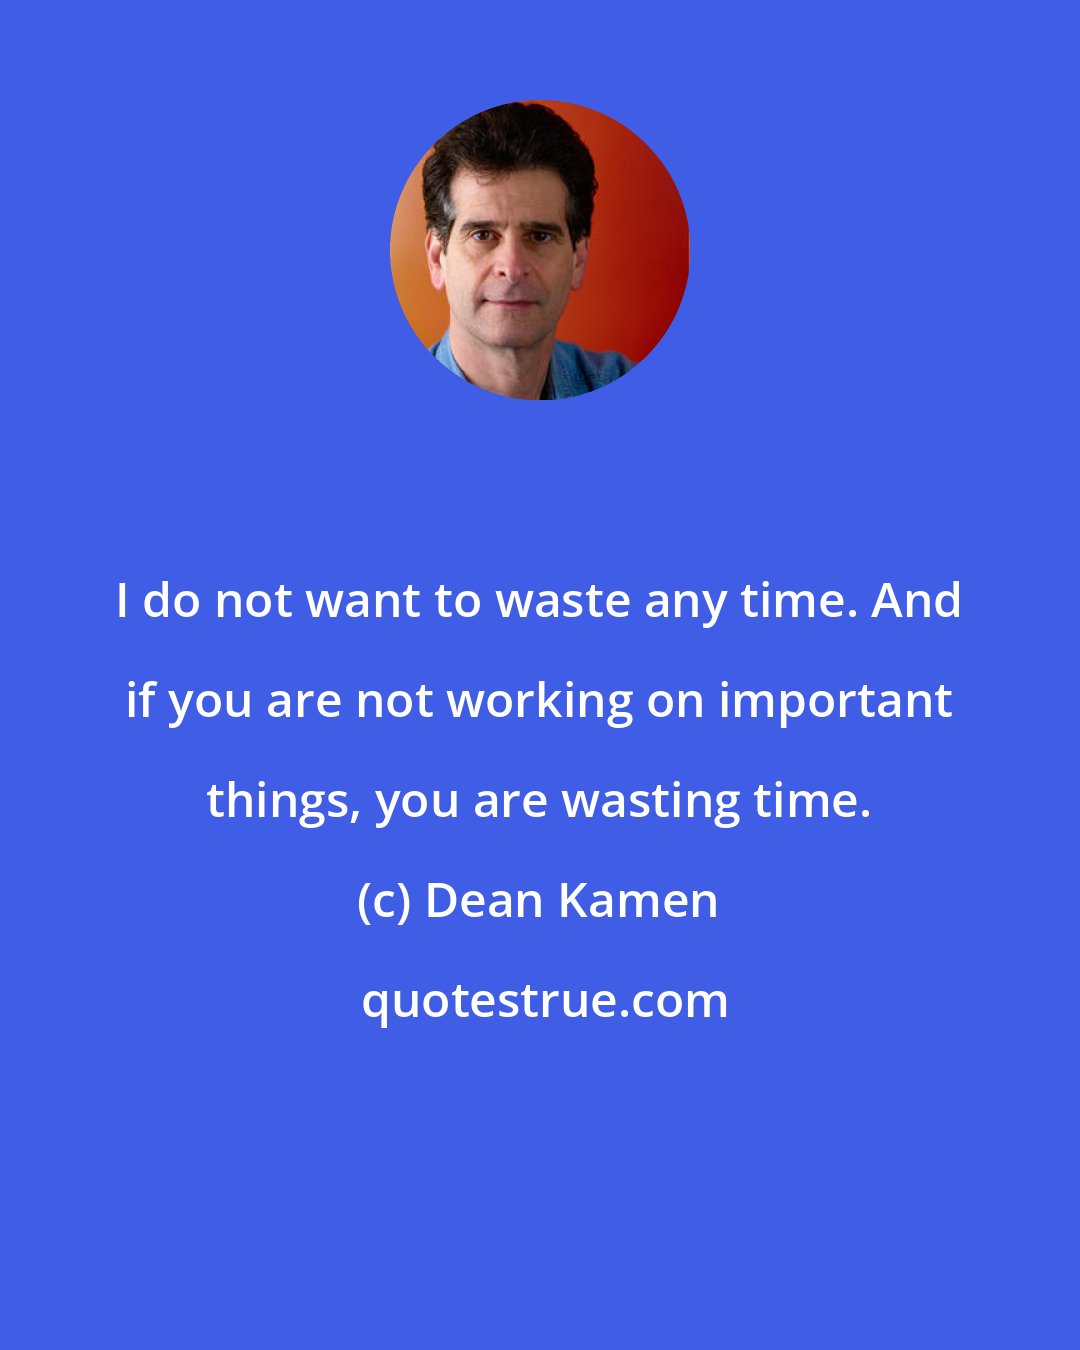 Dean Kamen: I do not want to waste any time. And if you are not working on important things, you are wasting time.